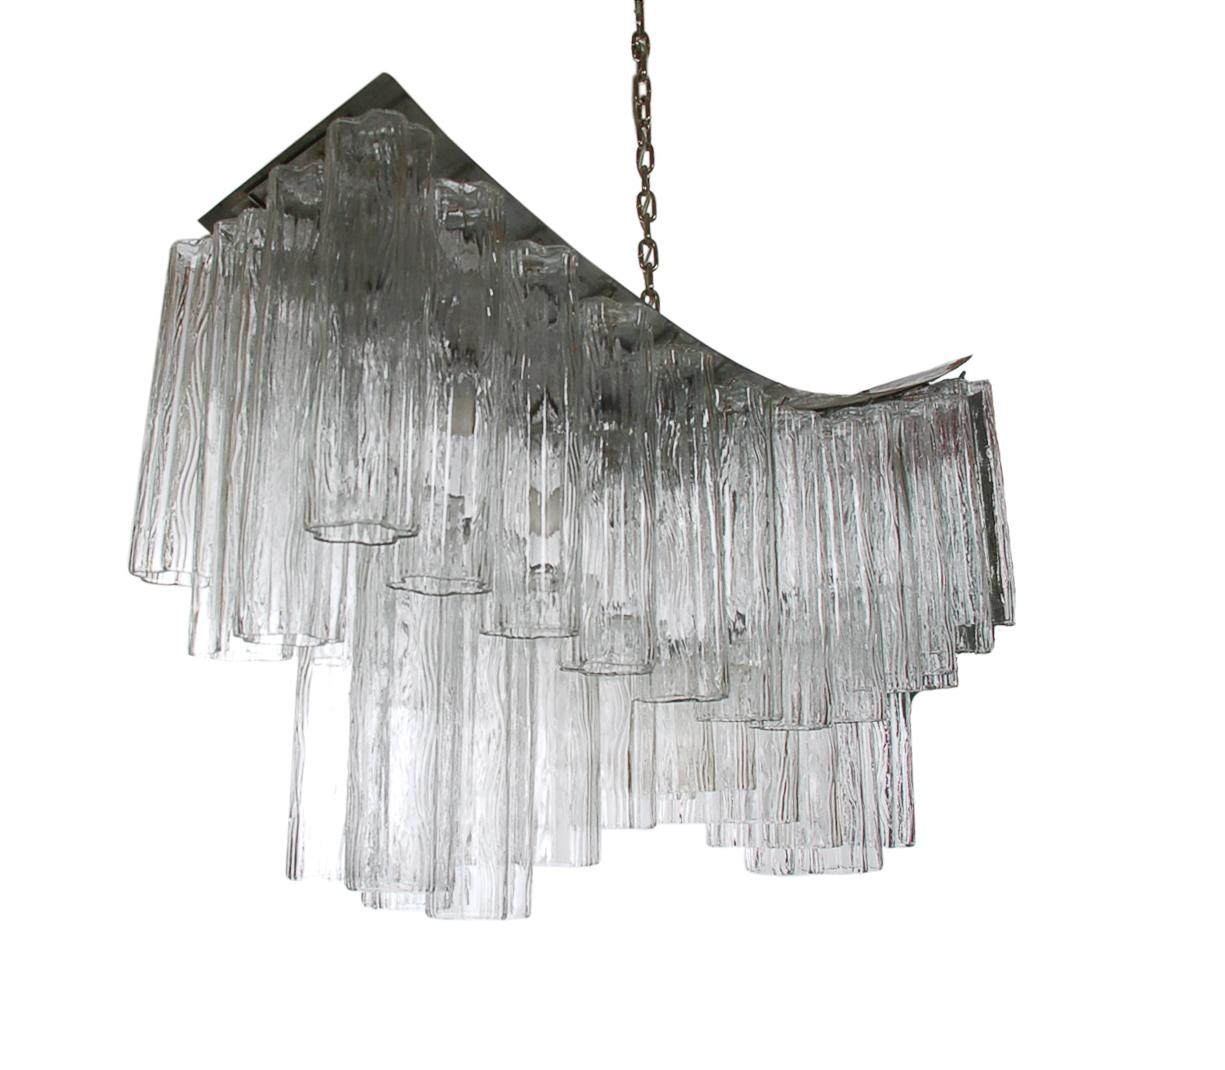 Steel Large Midcentury Italian Modern Murano Tronchi Glass Chandelier Whale Tail Form For Sale